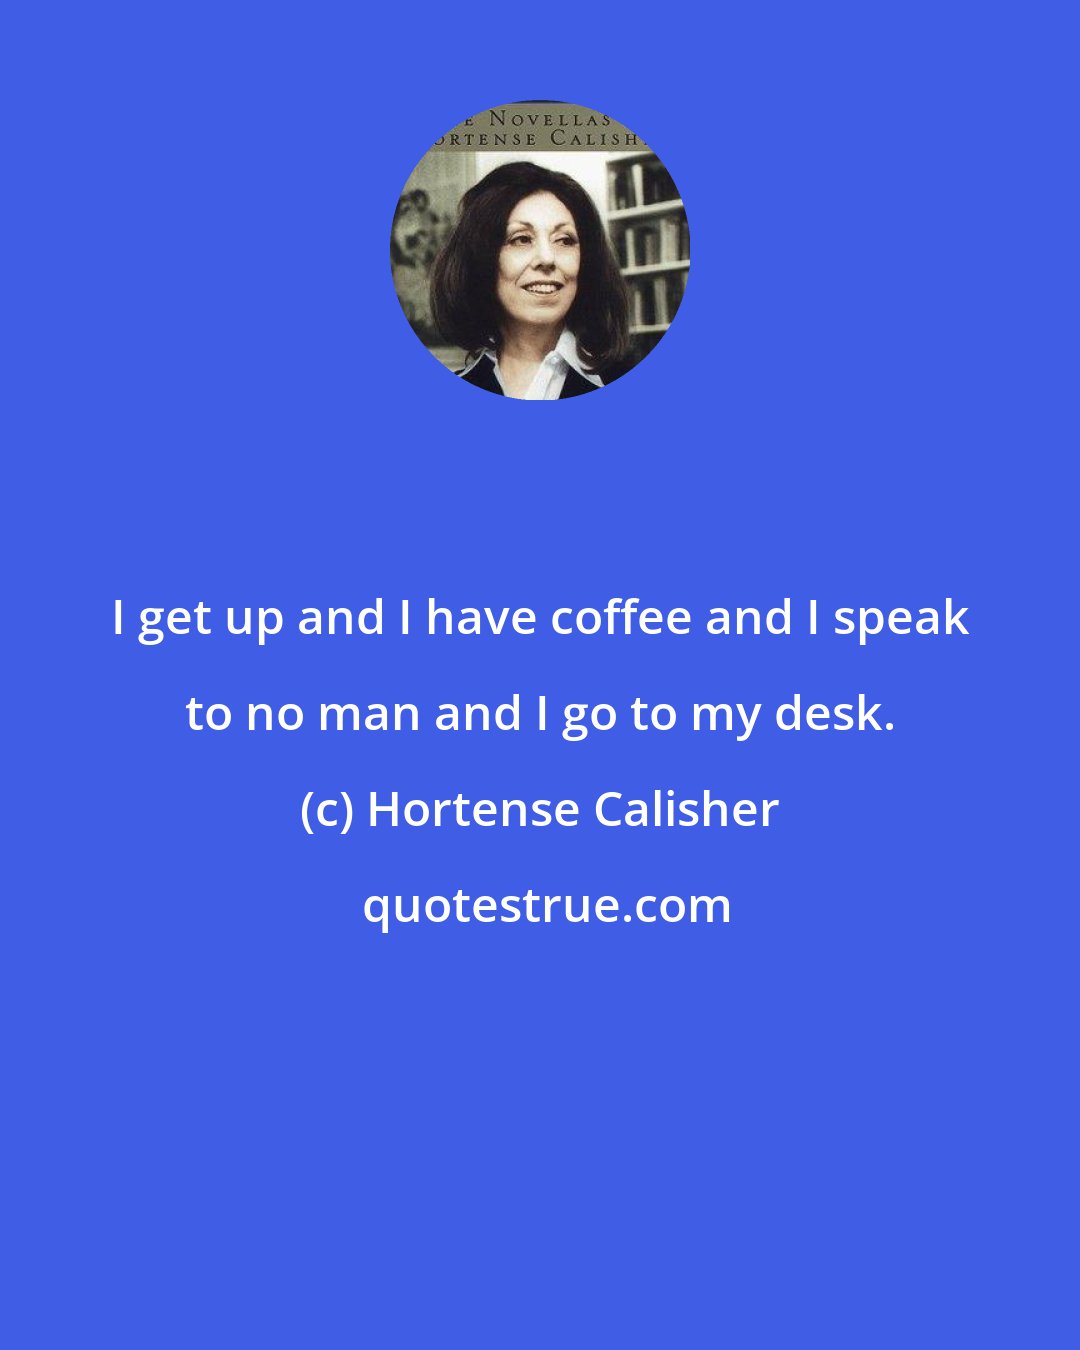 Hortense Calisher: I get up and I have coffee and I speak to no man and I go to my desk.